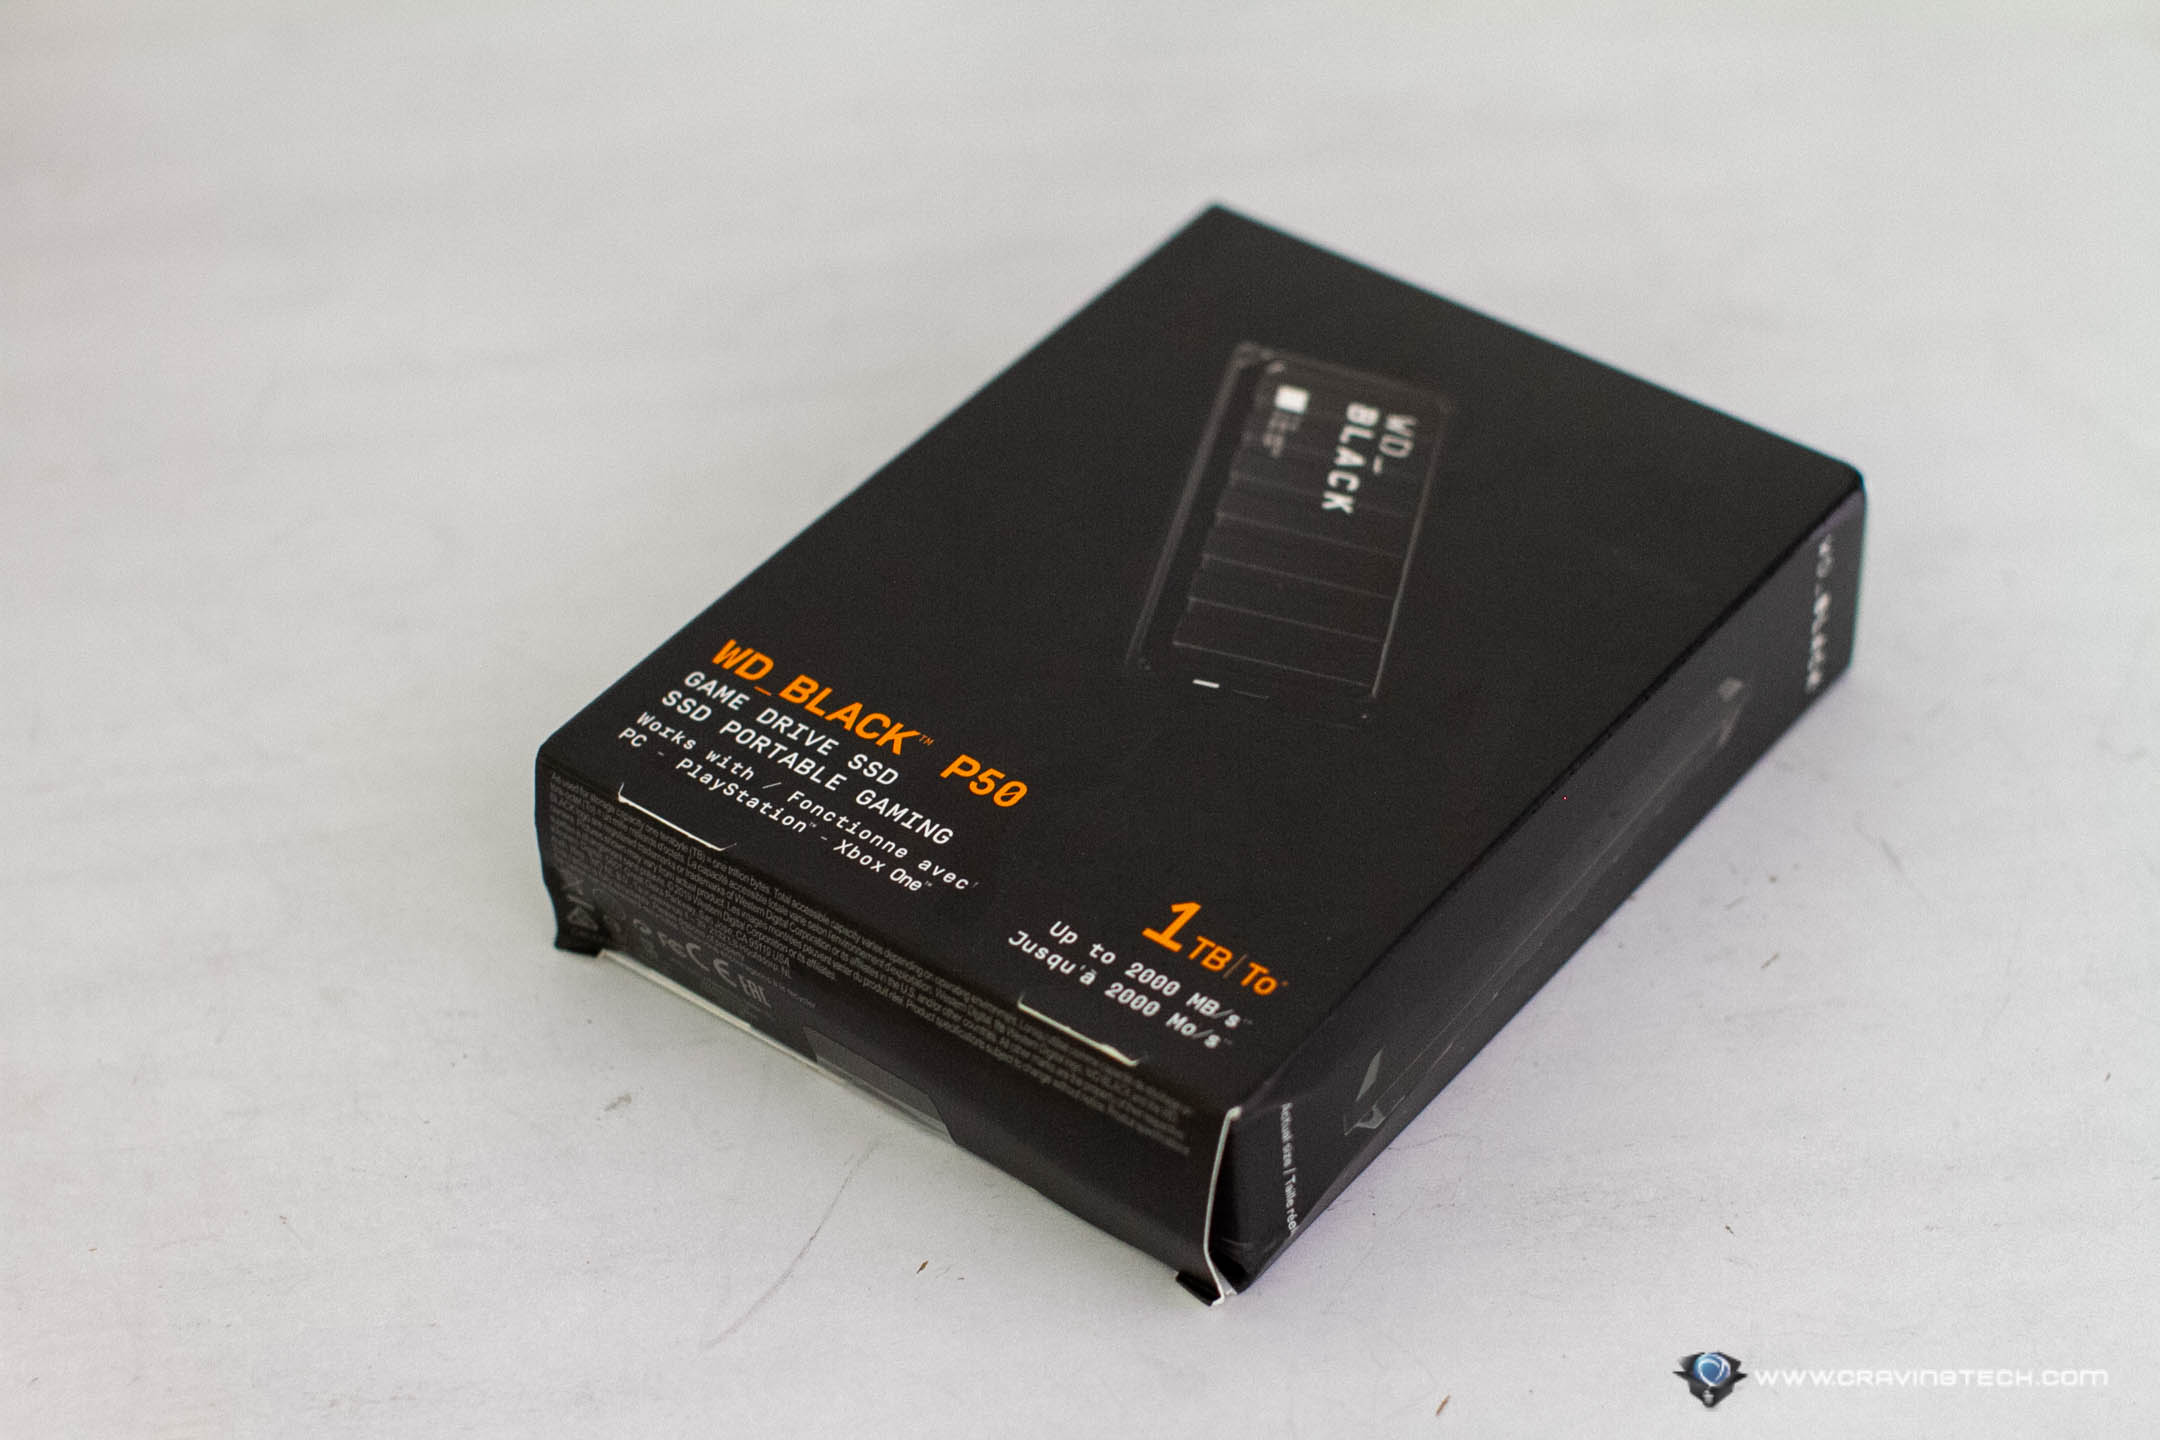 The Game Drive from the future  WD Black P50 Game Drive SSD Review